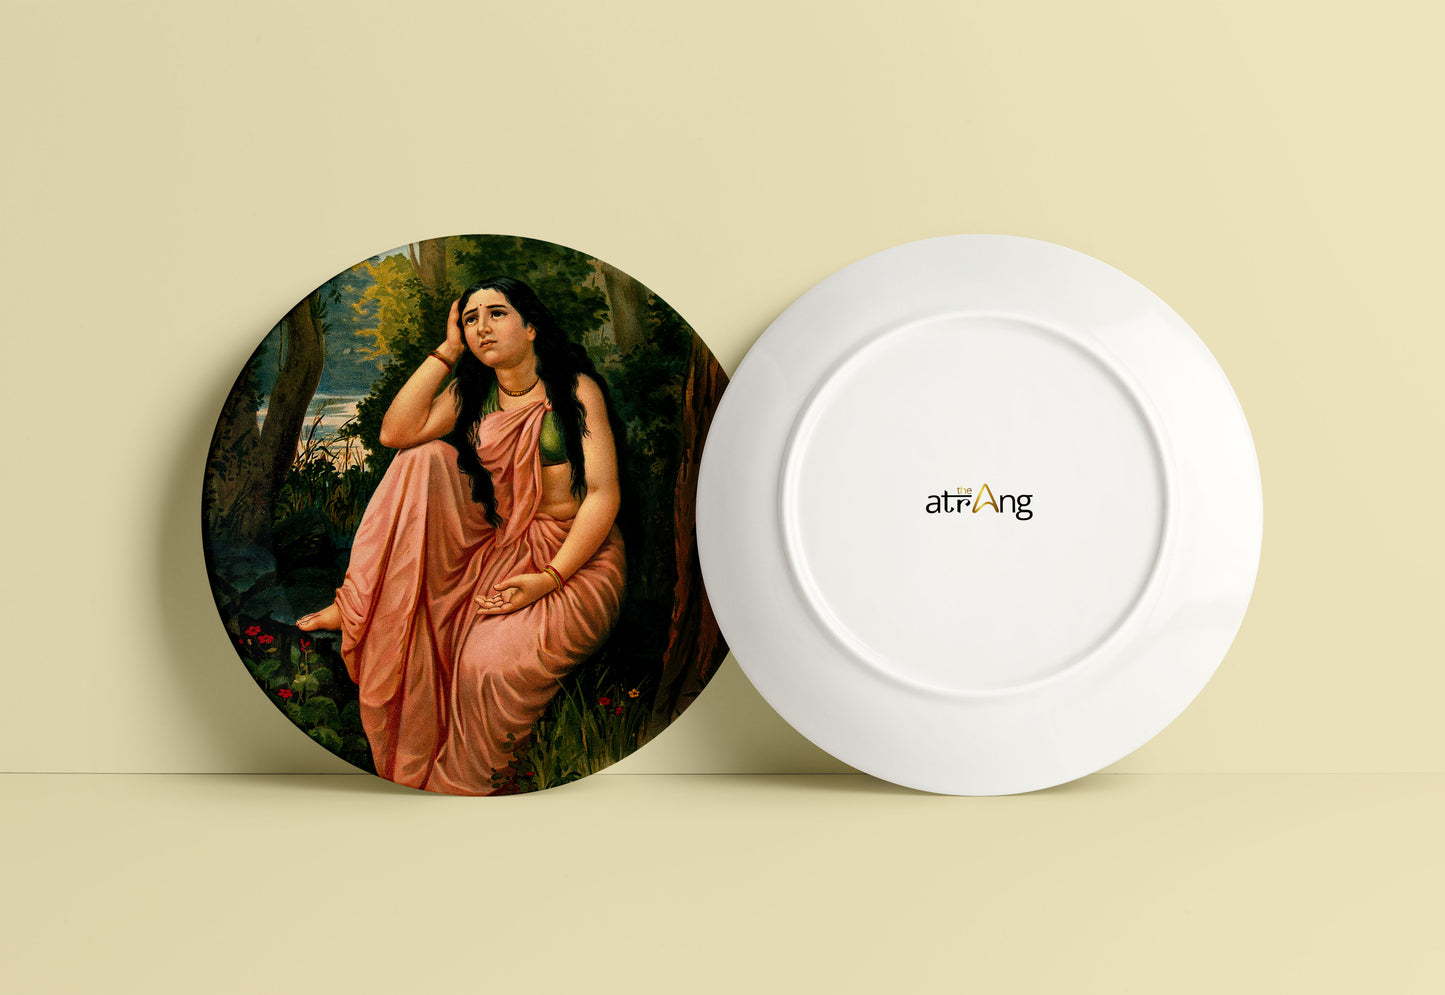 Damayanti deserted in the forest by Ravi Varma Ceramic Plate for Home Decor